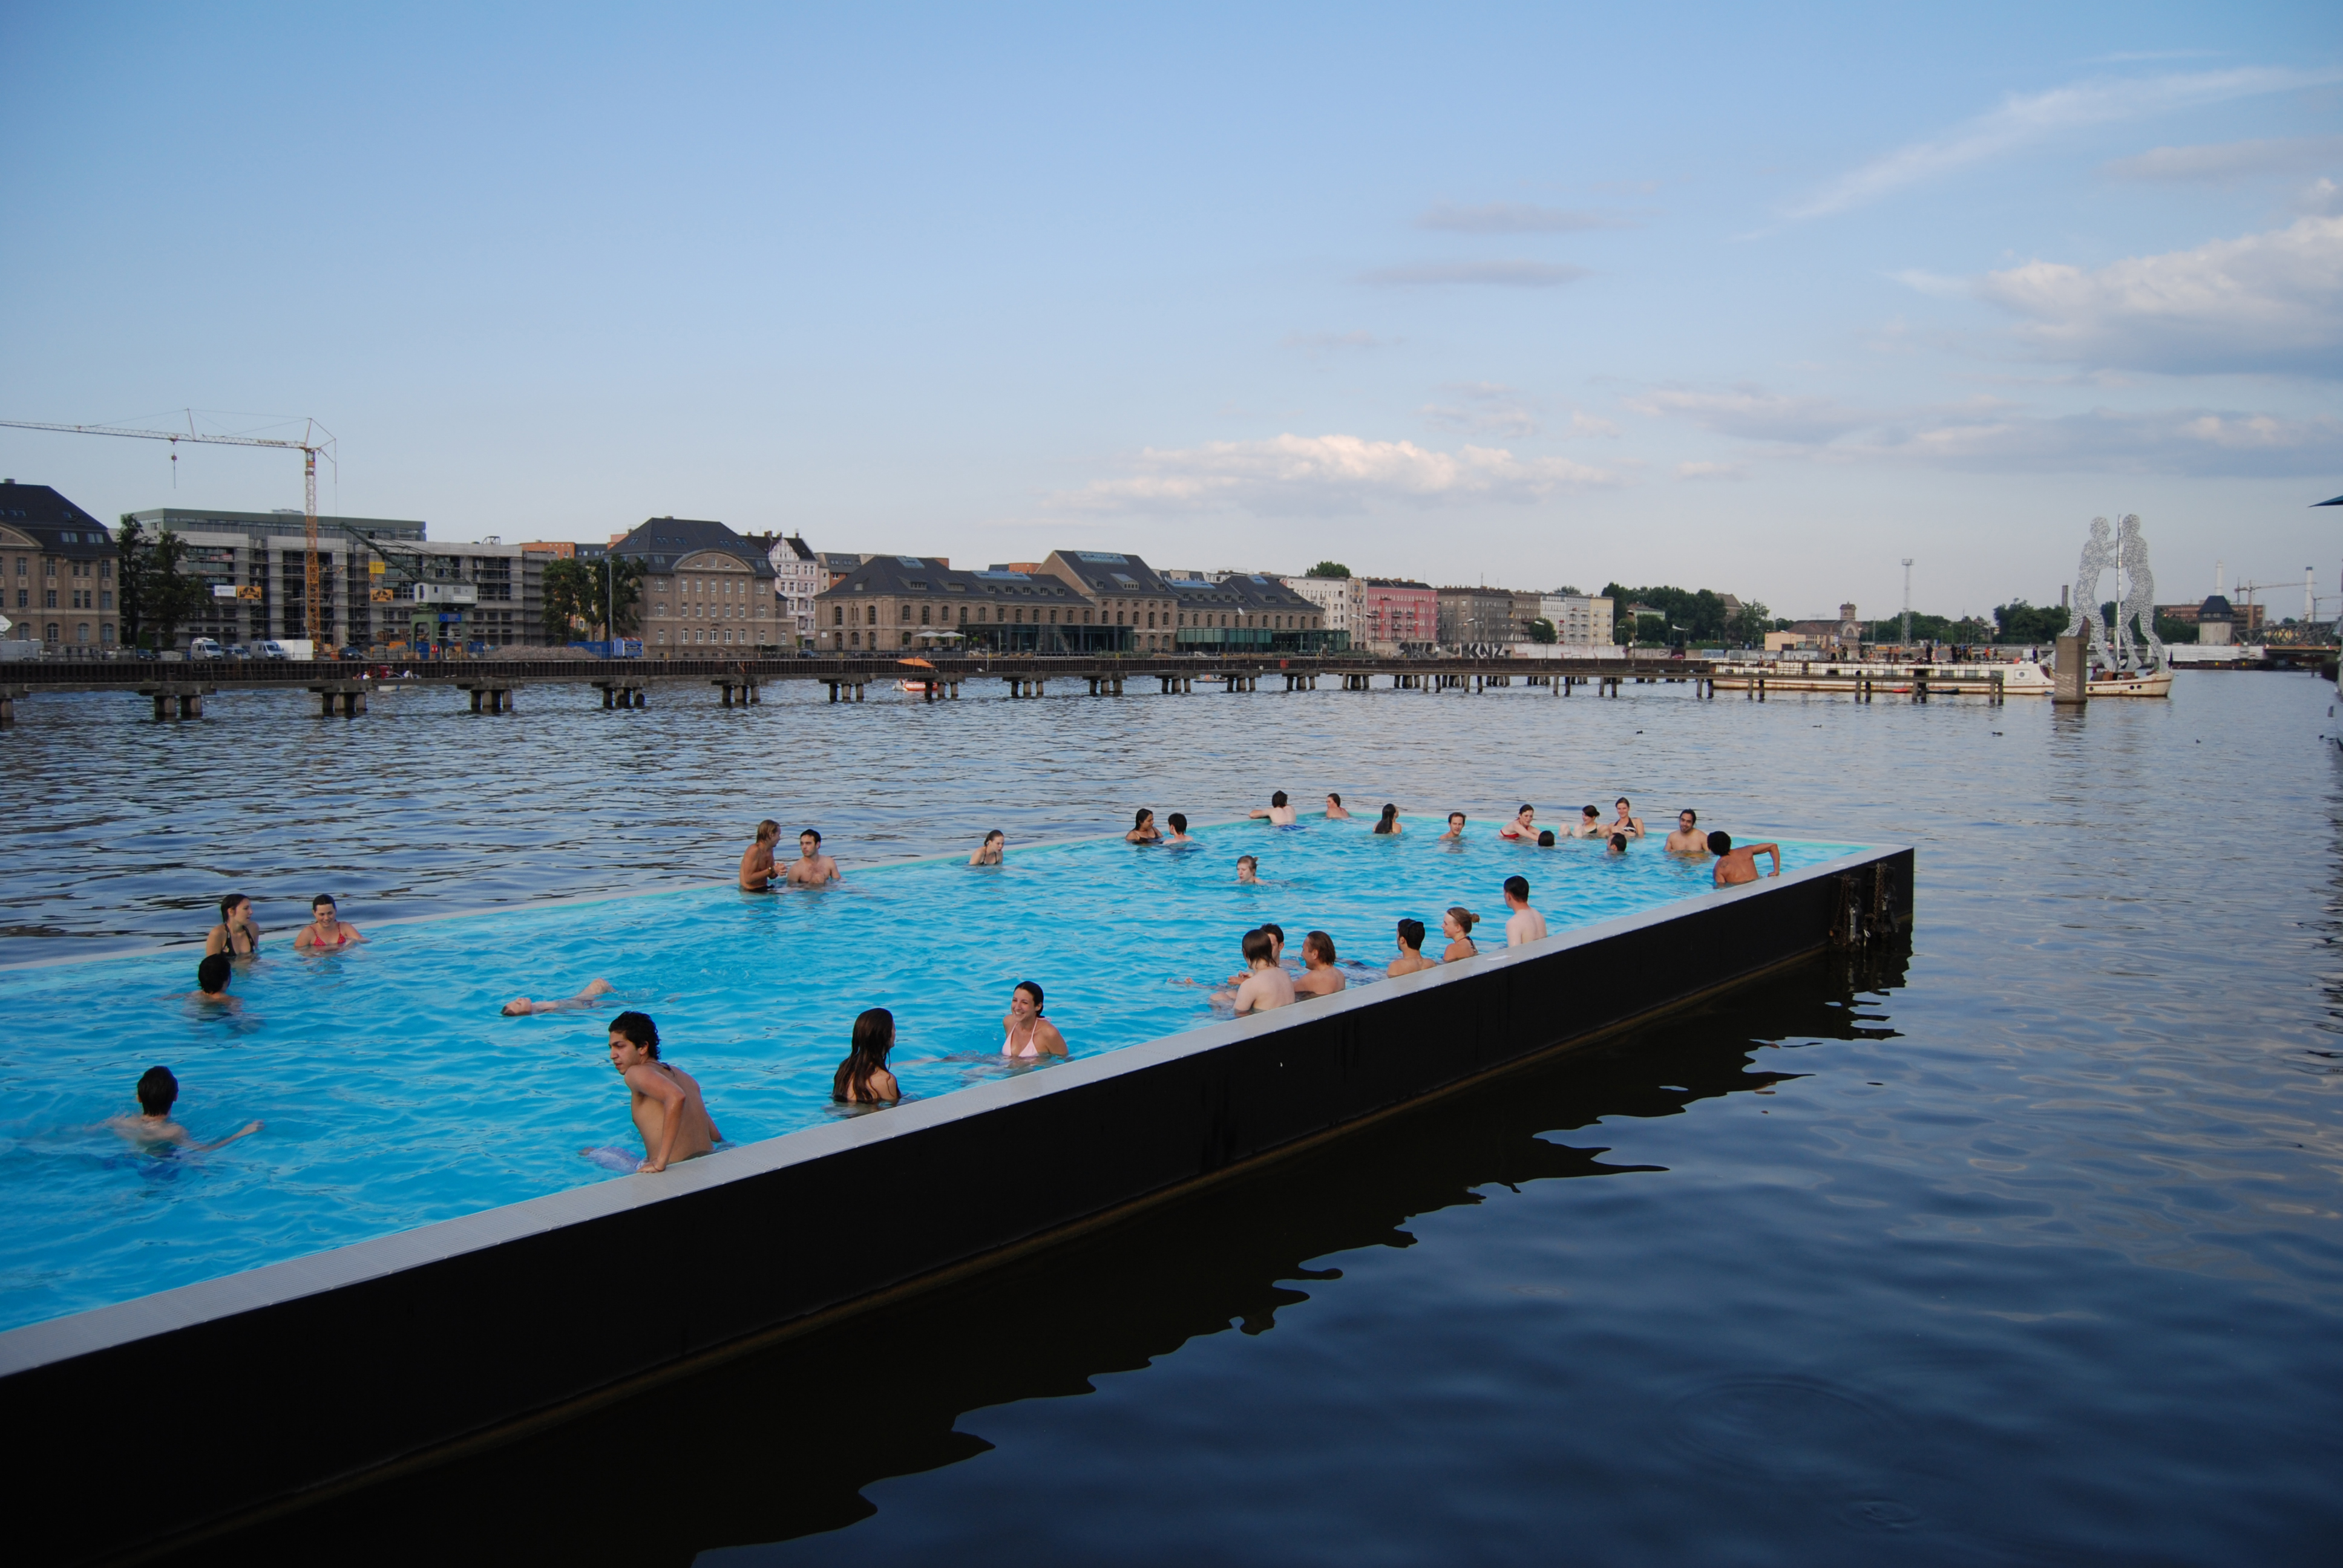 Swimming pool in the spree photo